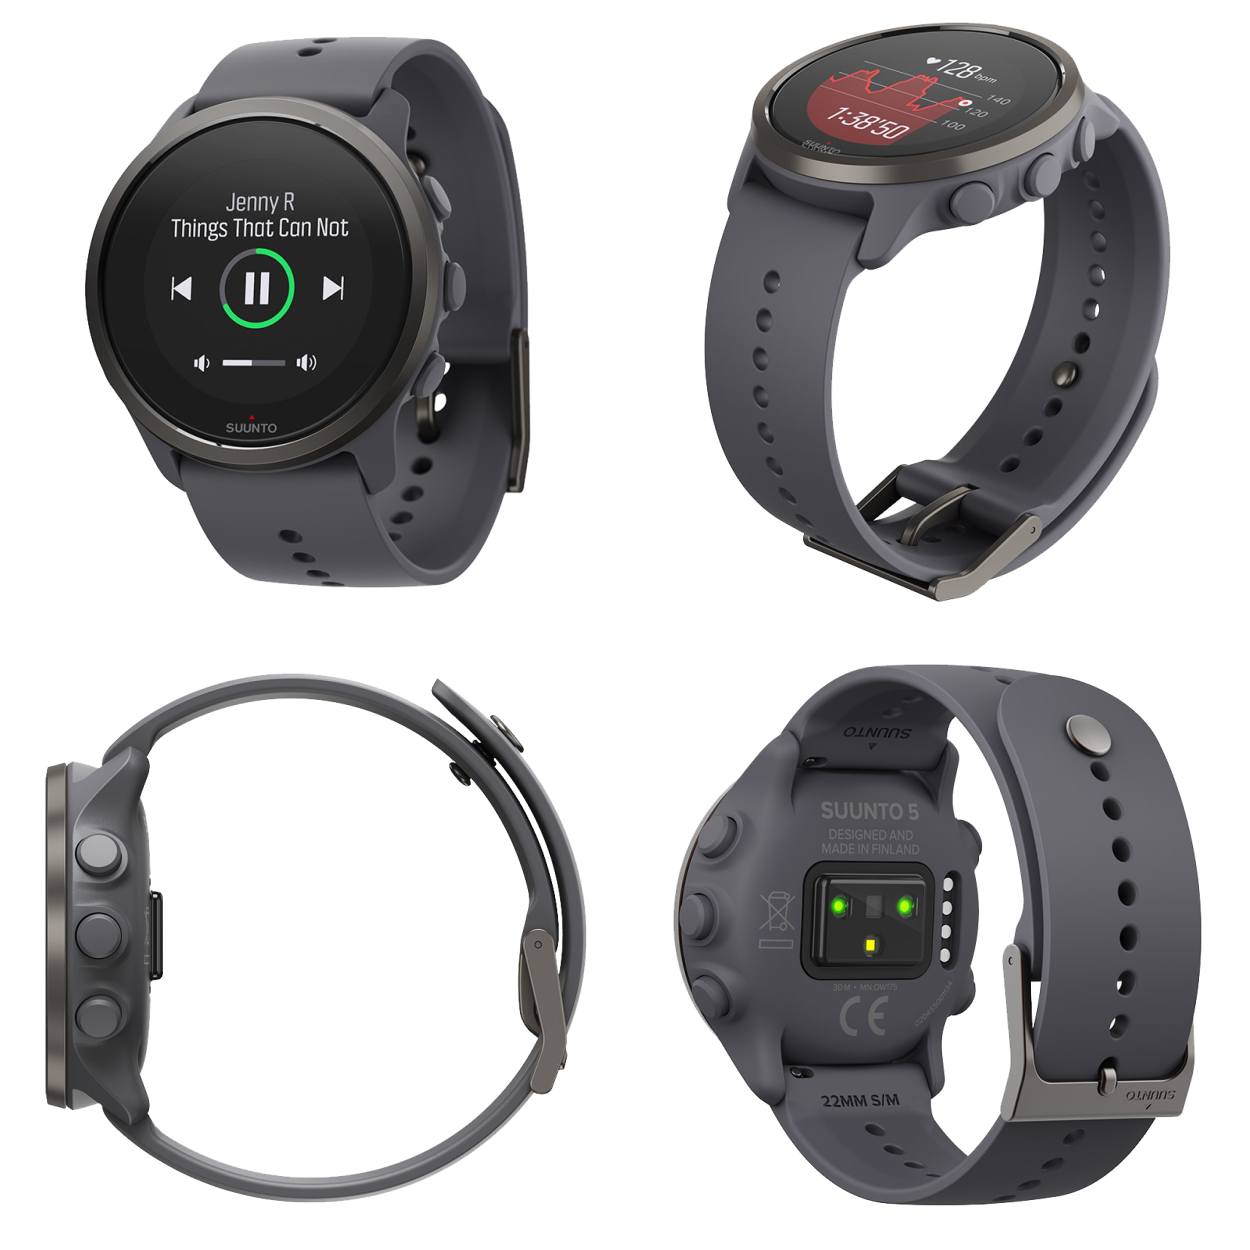 SUUNTO 5 Peak GPS Smartwatch 1.1 in. for Training, Exploring and Wellbeing  with Wearable4U Bundle